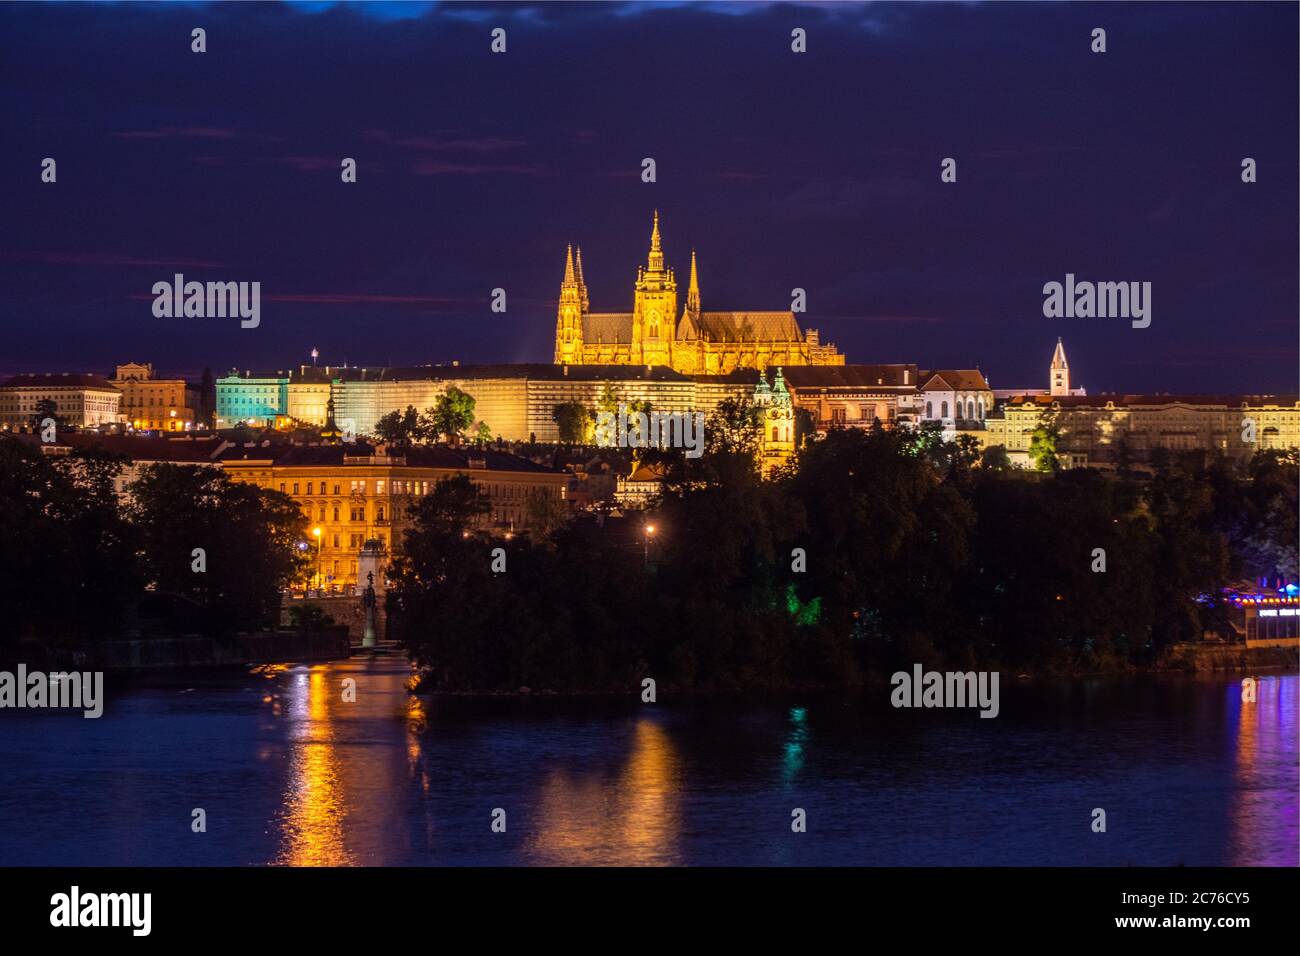 Saint Vitus Cathedral on Prague Castle, River Vltava and Hradcany District  at Night in HDR Stock Photo